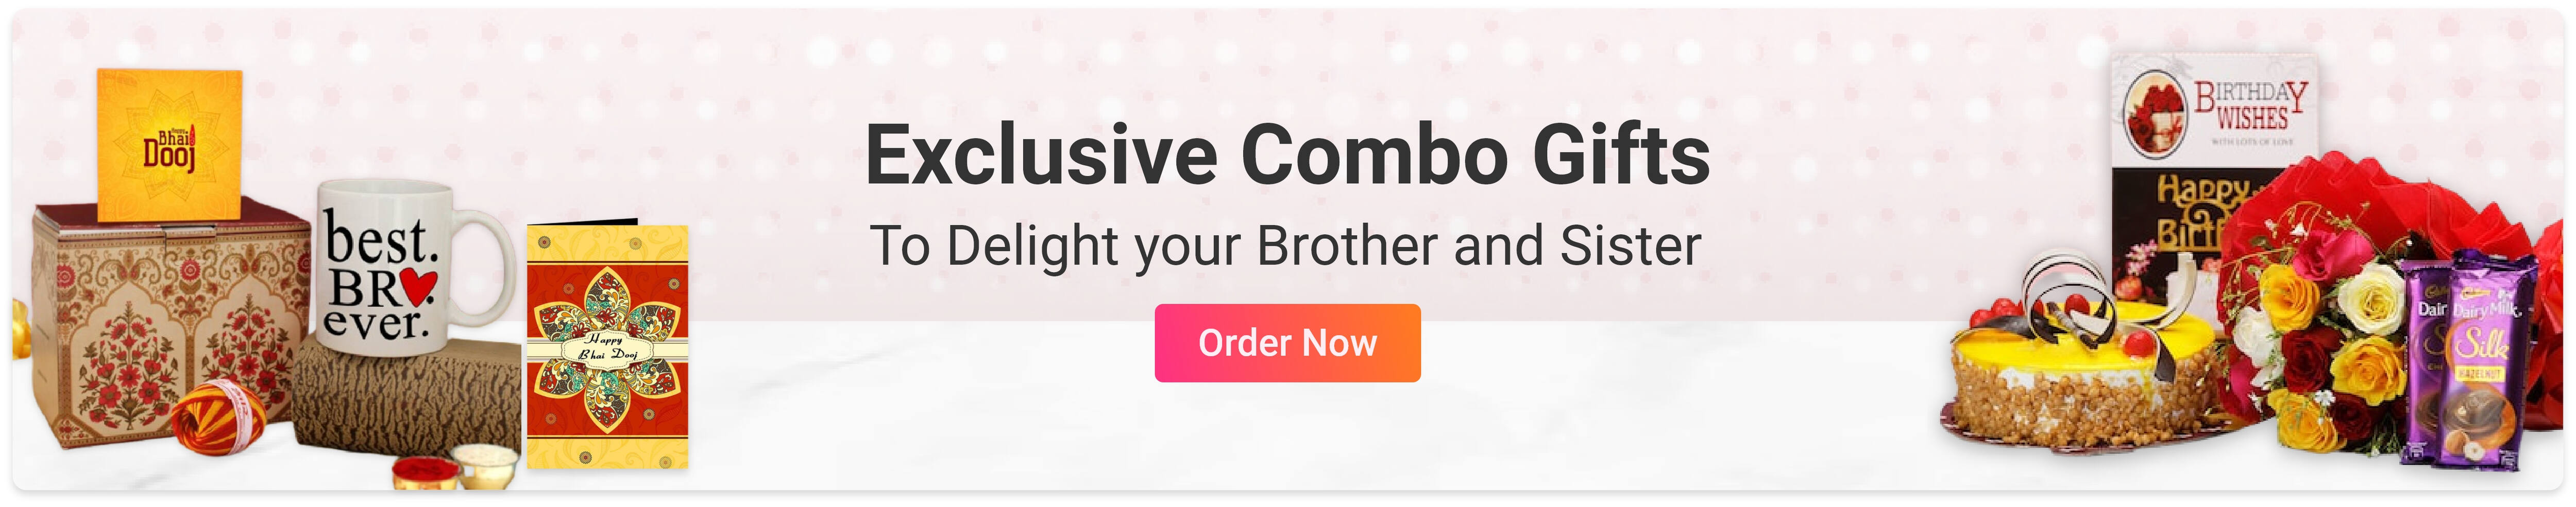 Exclusive Combo Gifts